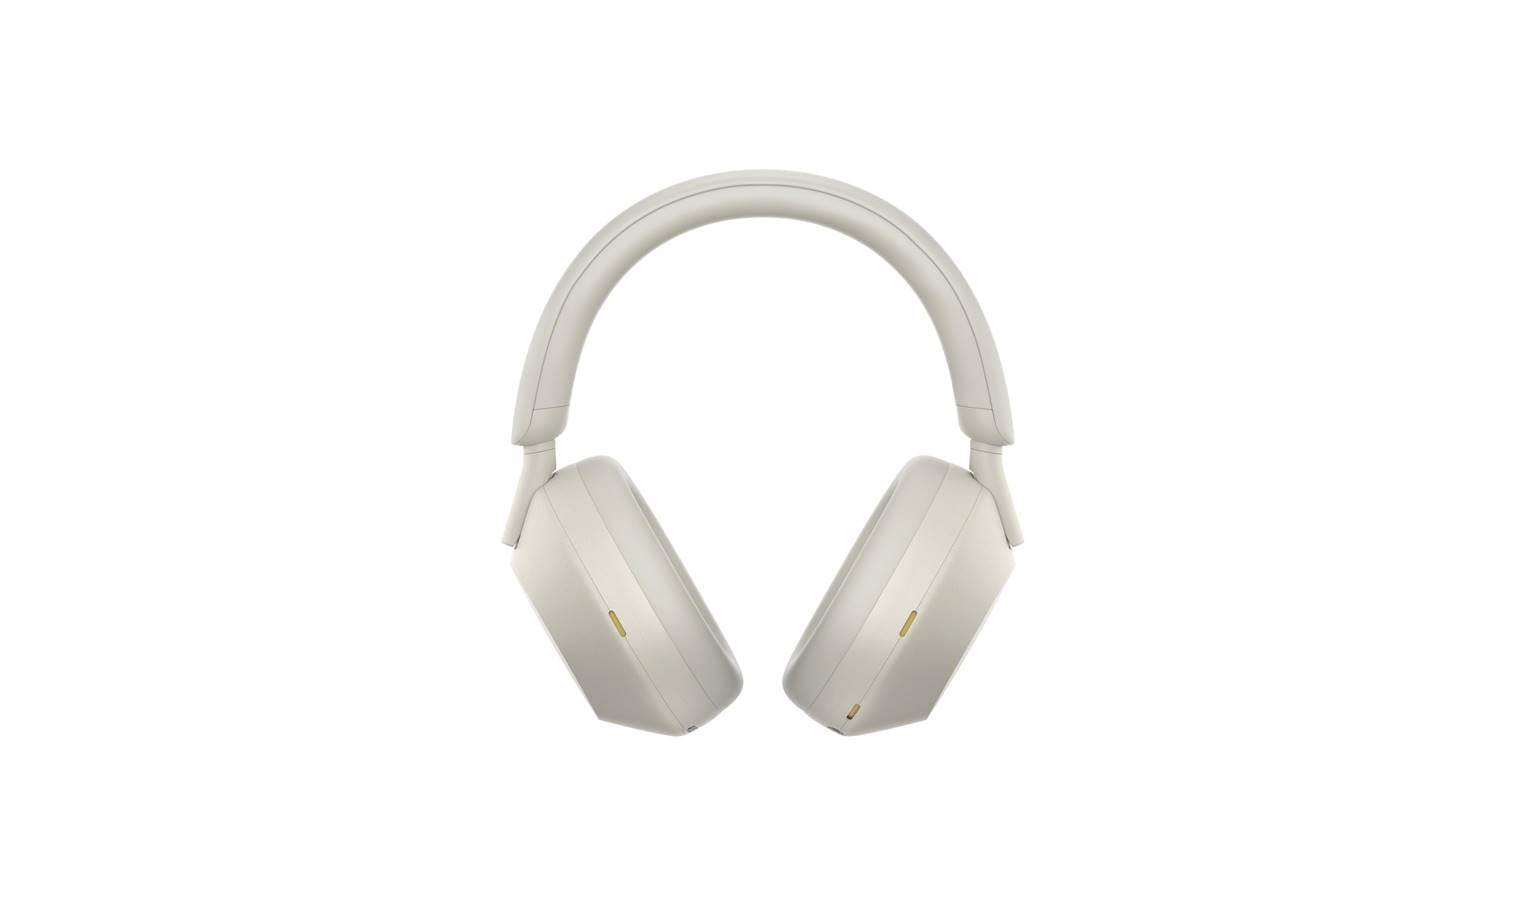 Sony WH1000-XM5/S wireless noise cancelling headphones (silver)